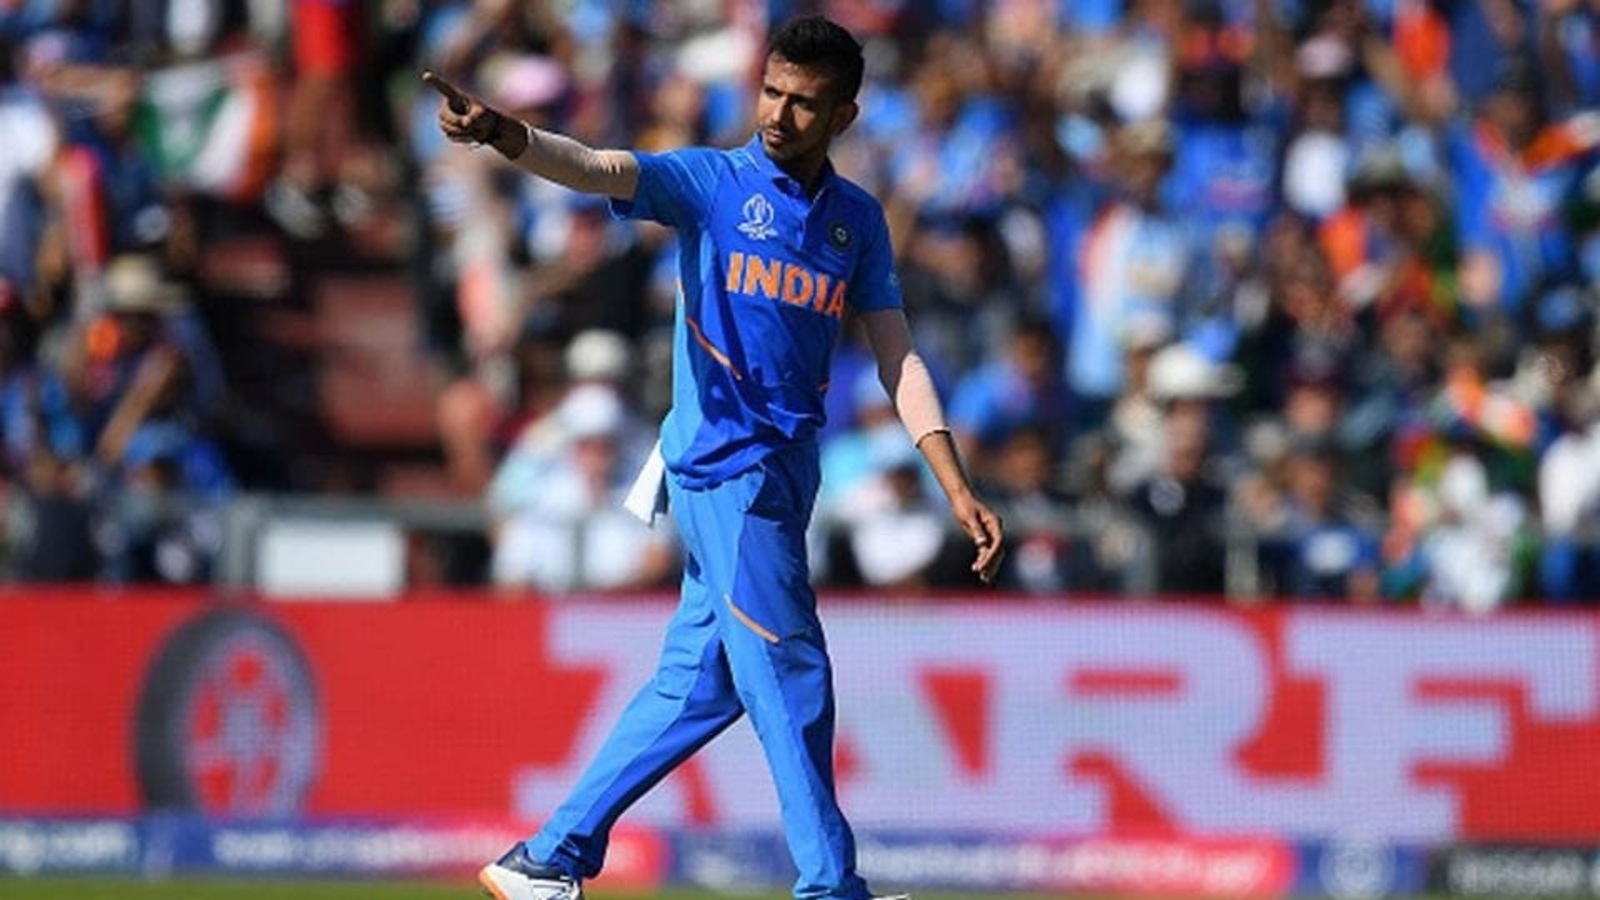 Mature d cup When We Lost The World Cup Semi Final He Was Really Hurt Chahal On How India Youngster Has Really Matured Cricket Hindustan Times